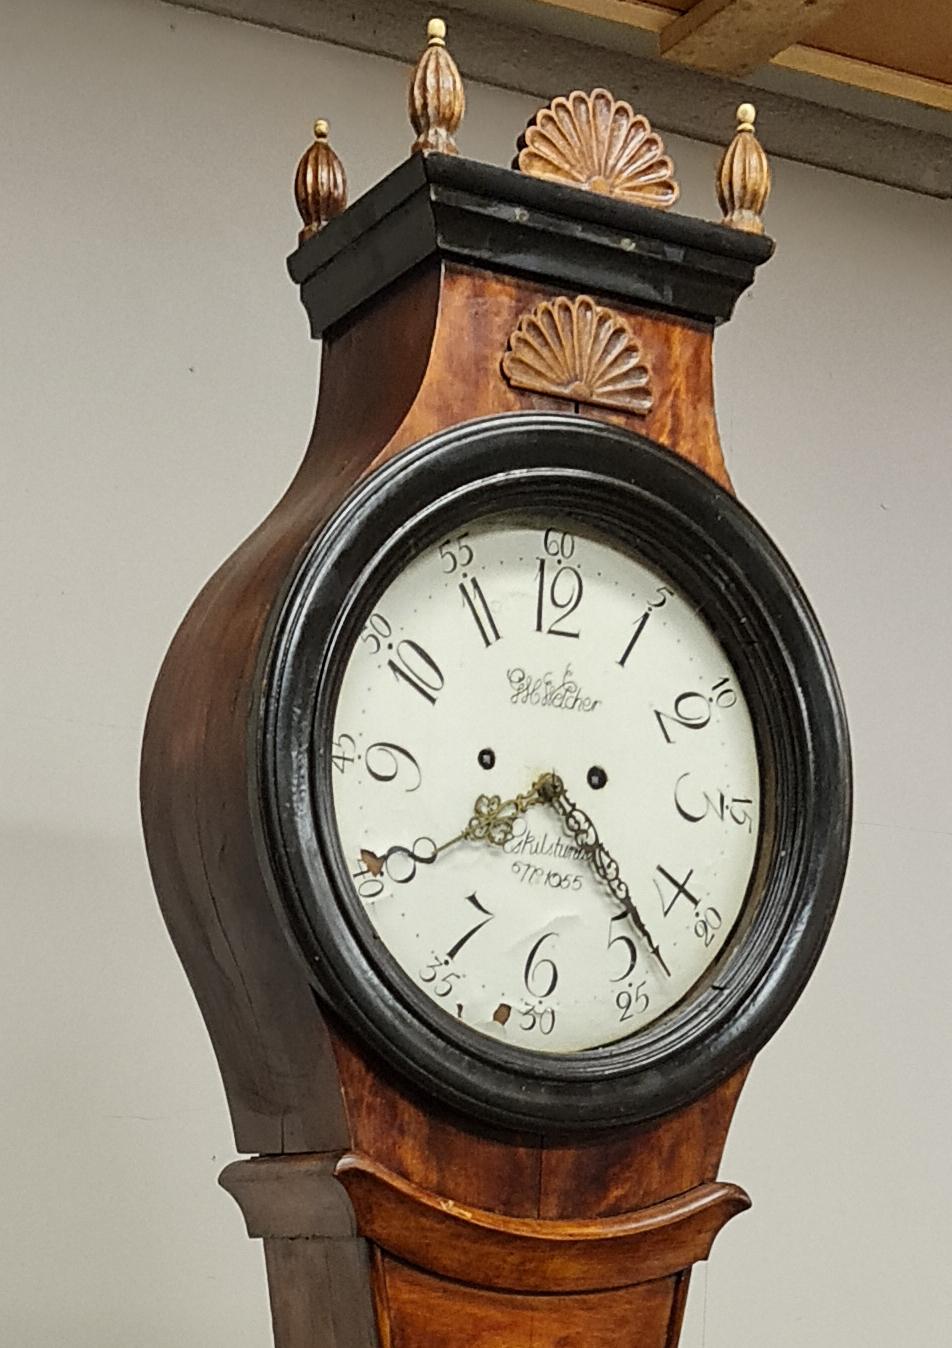 Antique Swedish mora clock from early 1800s in Biedermeier style with natural finish and ormolu style detail with a great shape body and a good face with lots of detail include the belly sun motif and nicely detailed hood. Measures: 220cm.

It has